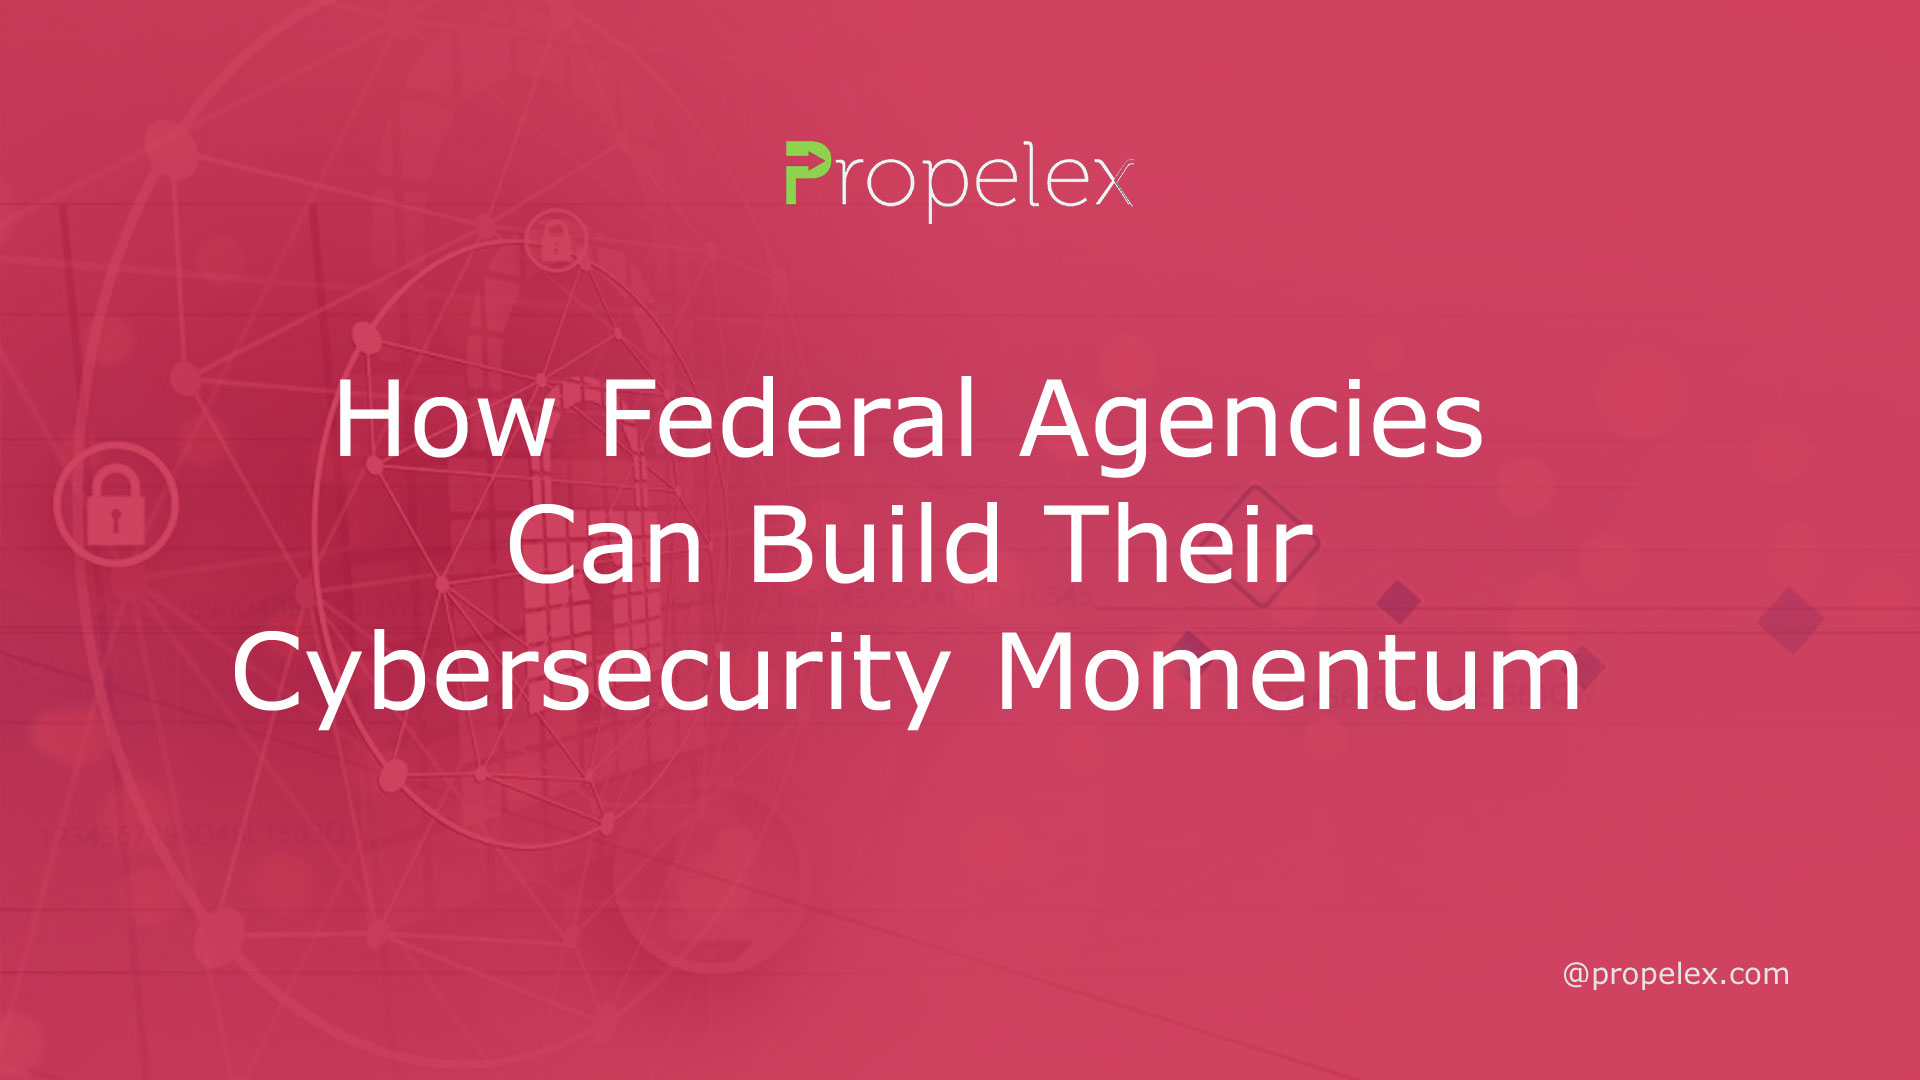 How Federal Agencies Can Build Their Cybersecurity Momentum